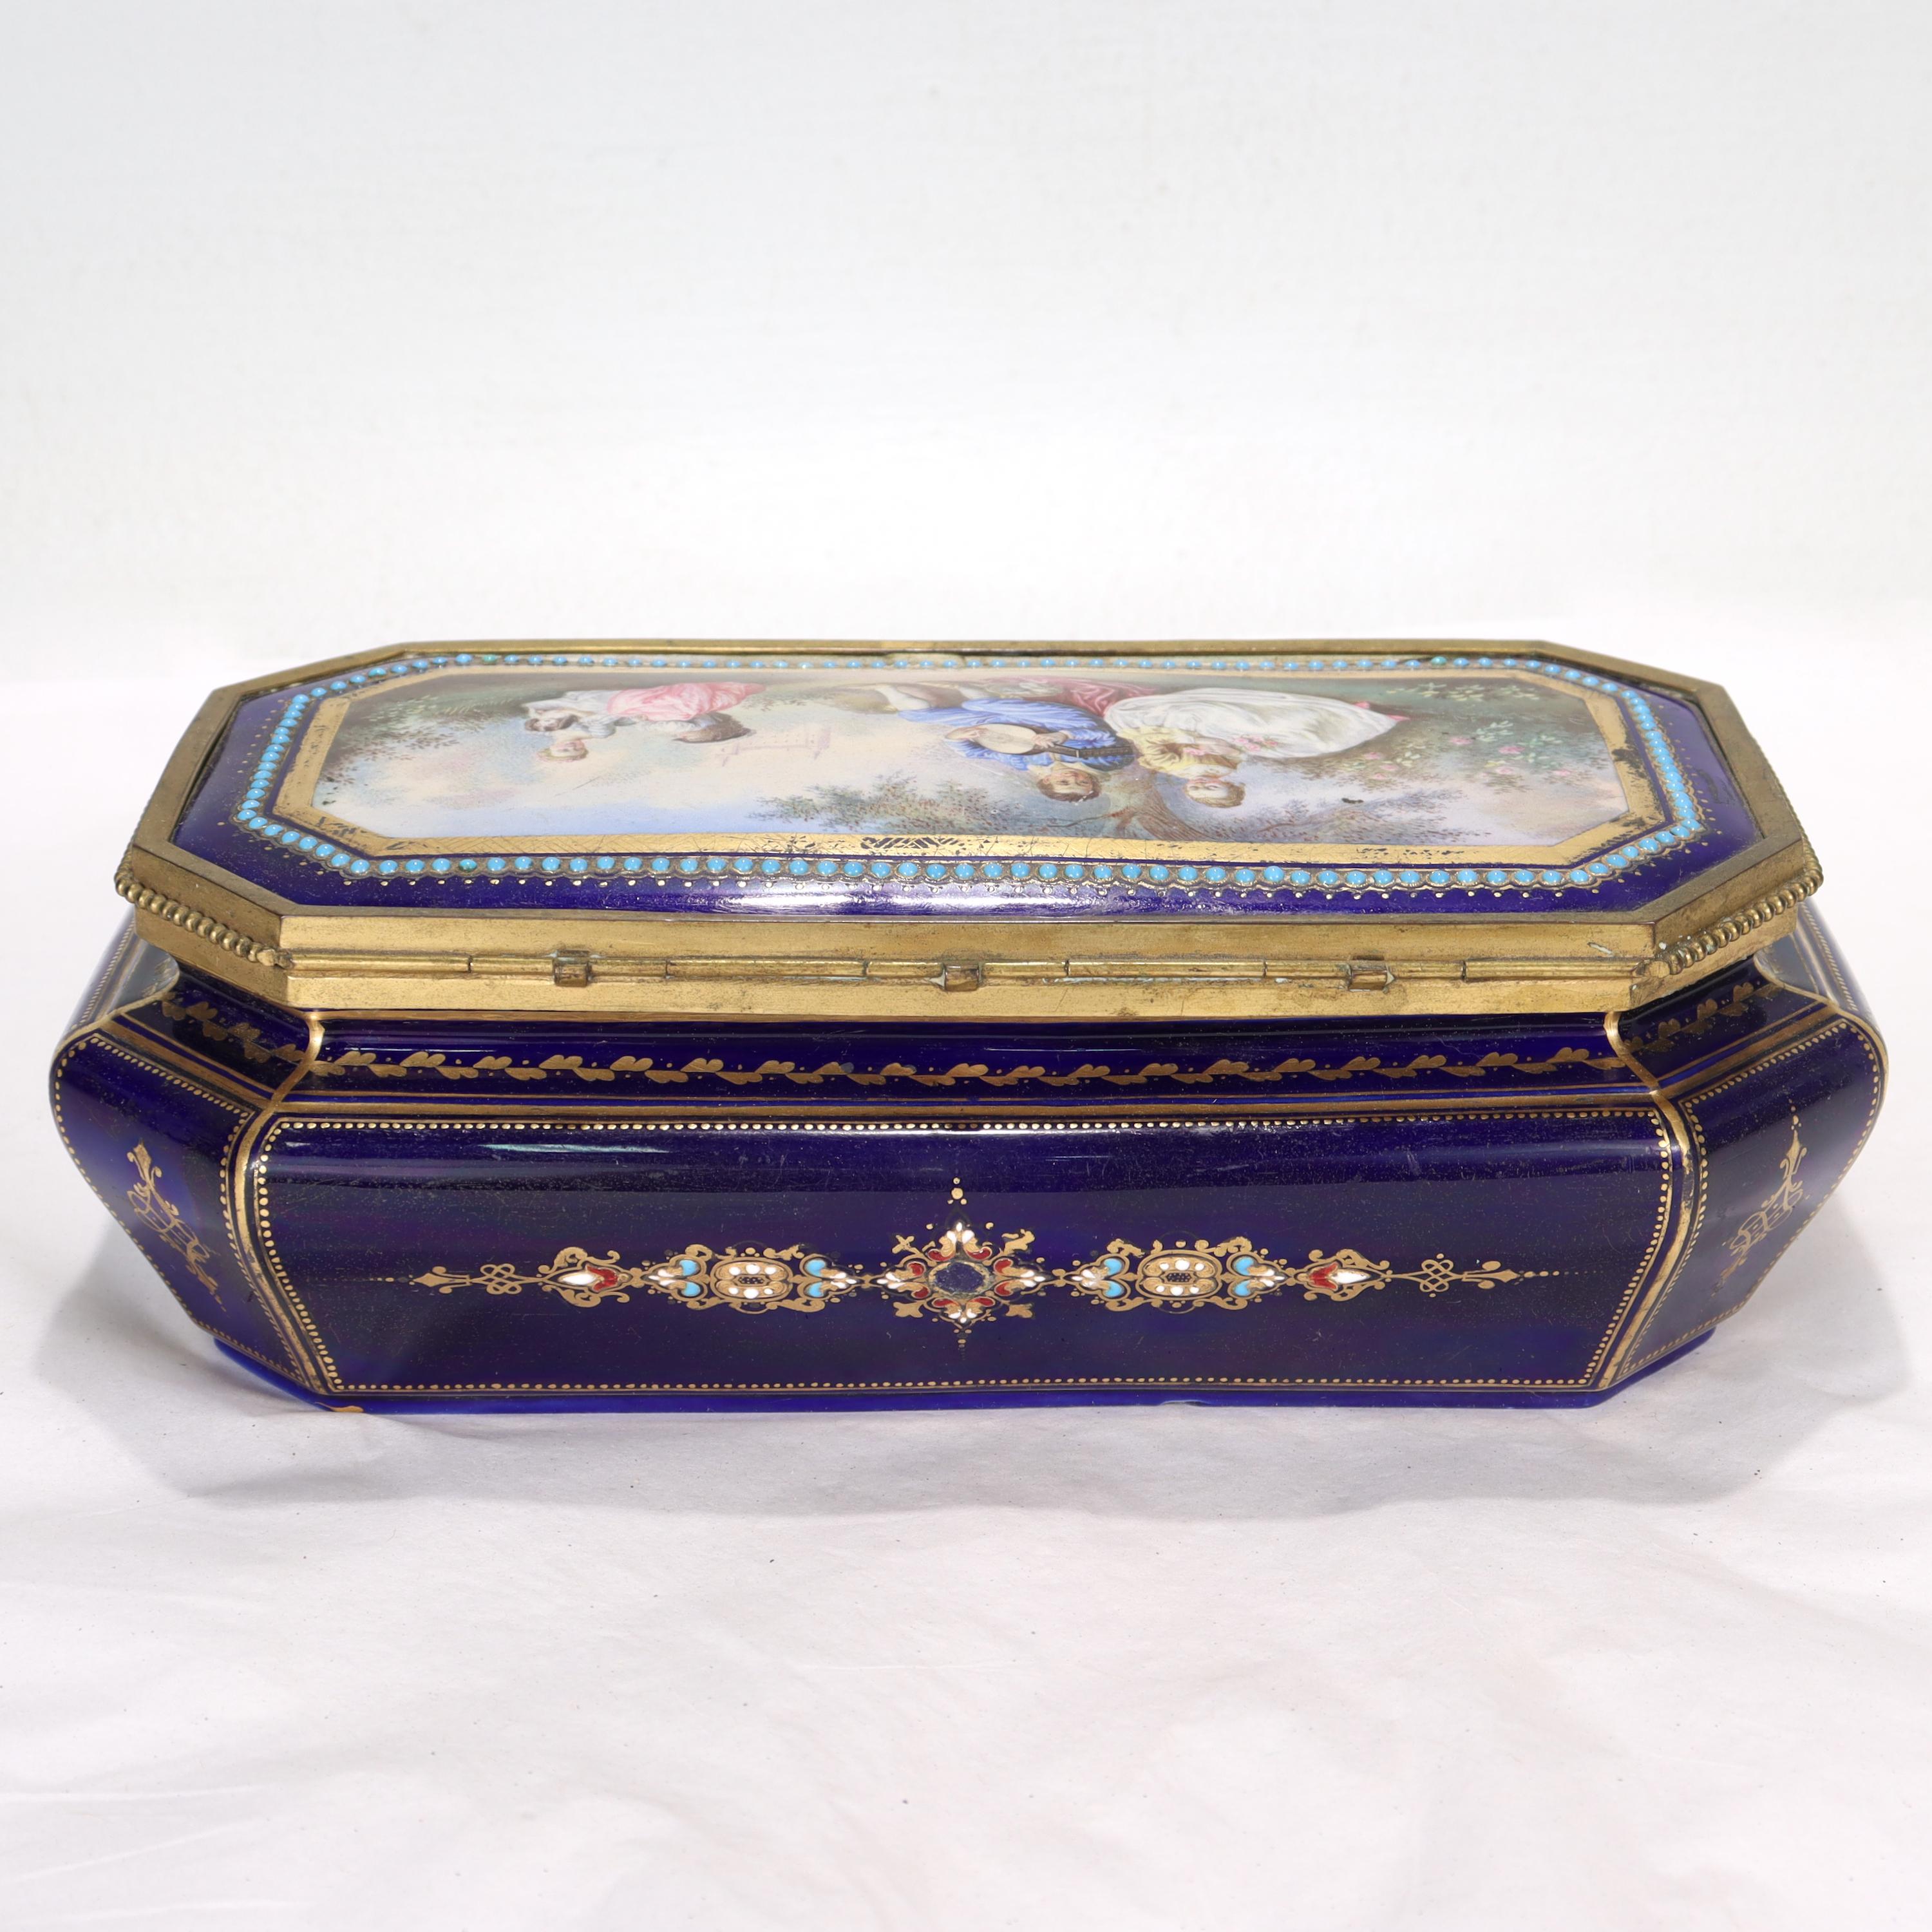 Antique Hand Painted Jeweled French Sevres Type Cobalt Blue Porcelain Table Box For Sale 3